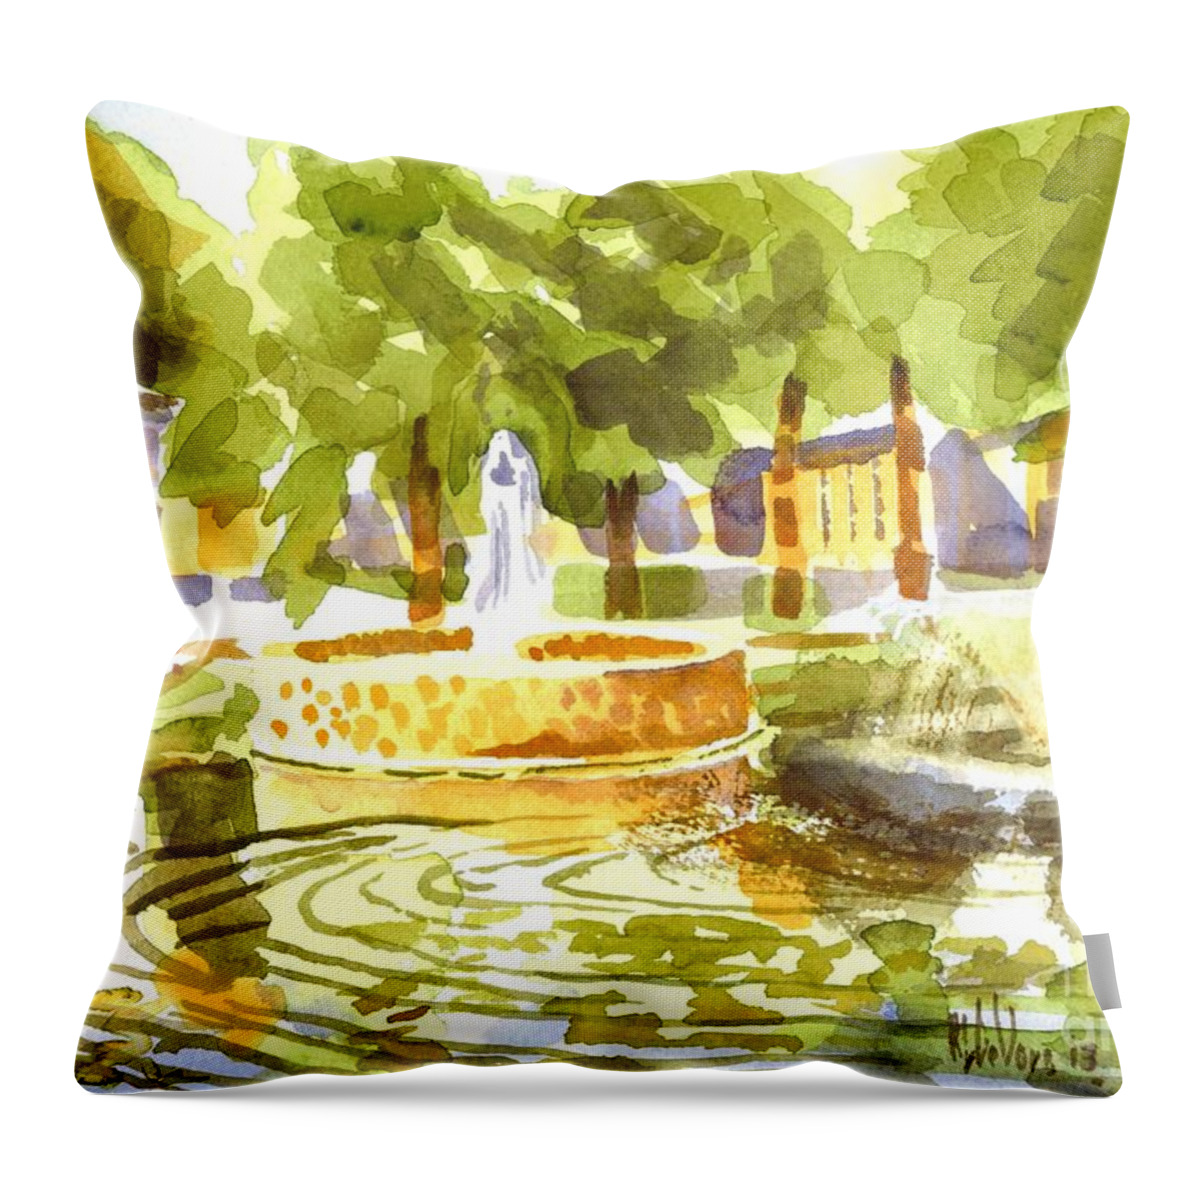 Reflections Throw Pillow featuring the painting Reflections by Kip DeVore